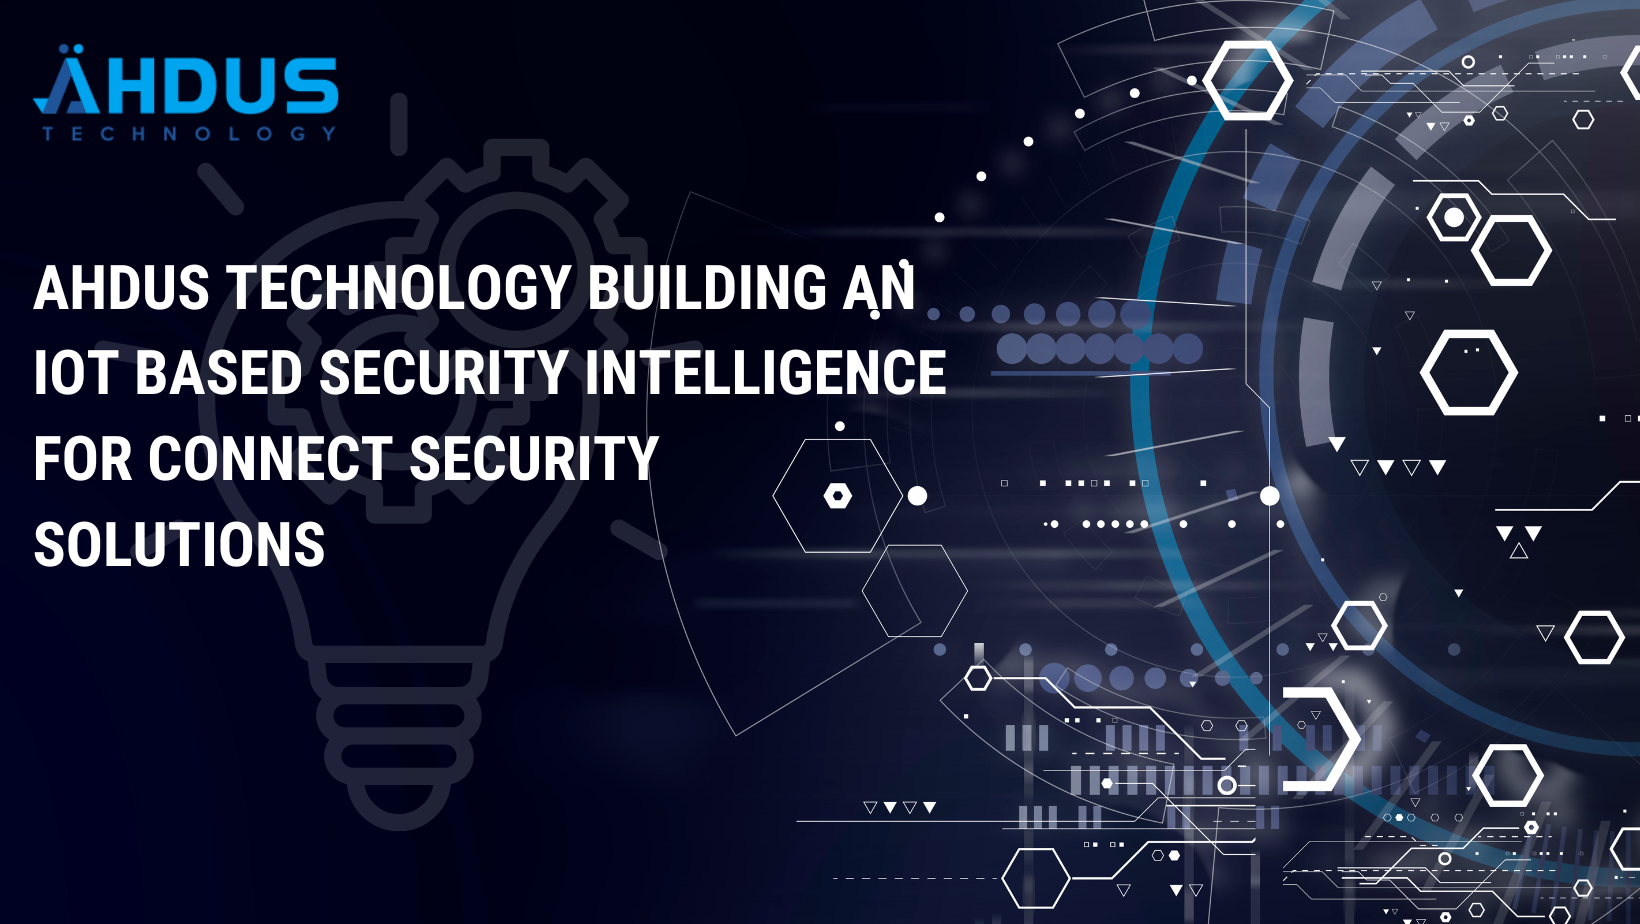 Ahdus Technology building an IOT based Security Intelligence for Connect security solutions